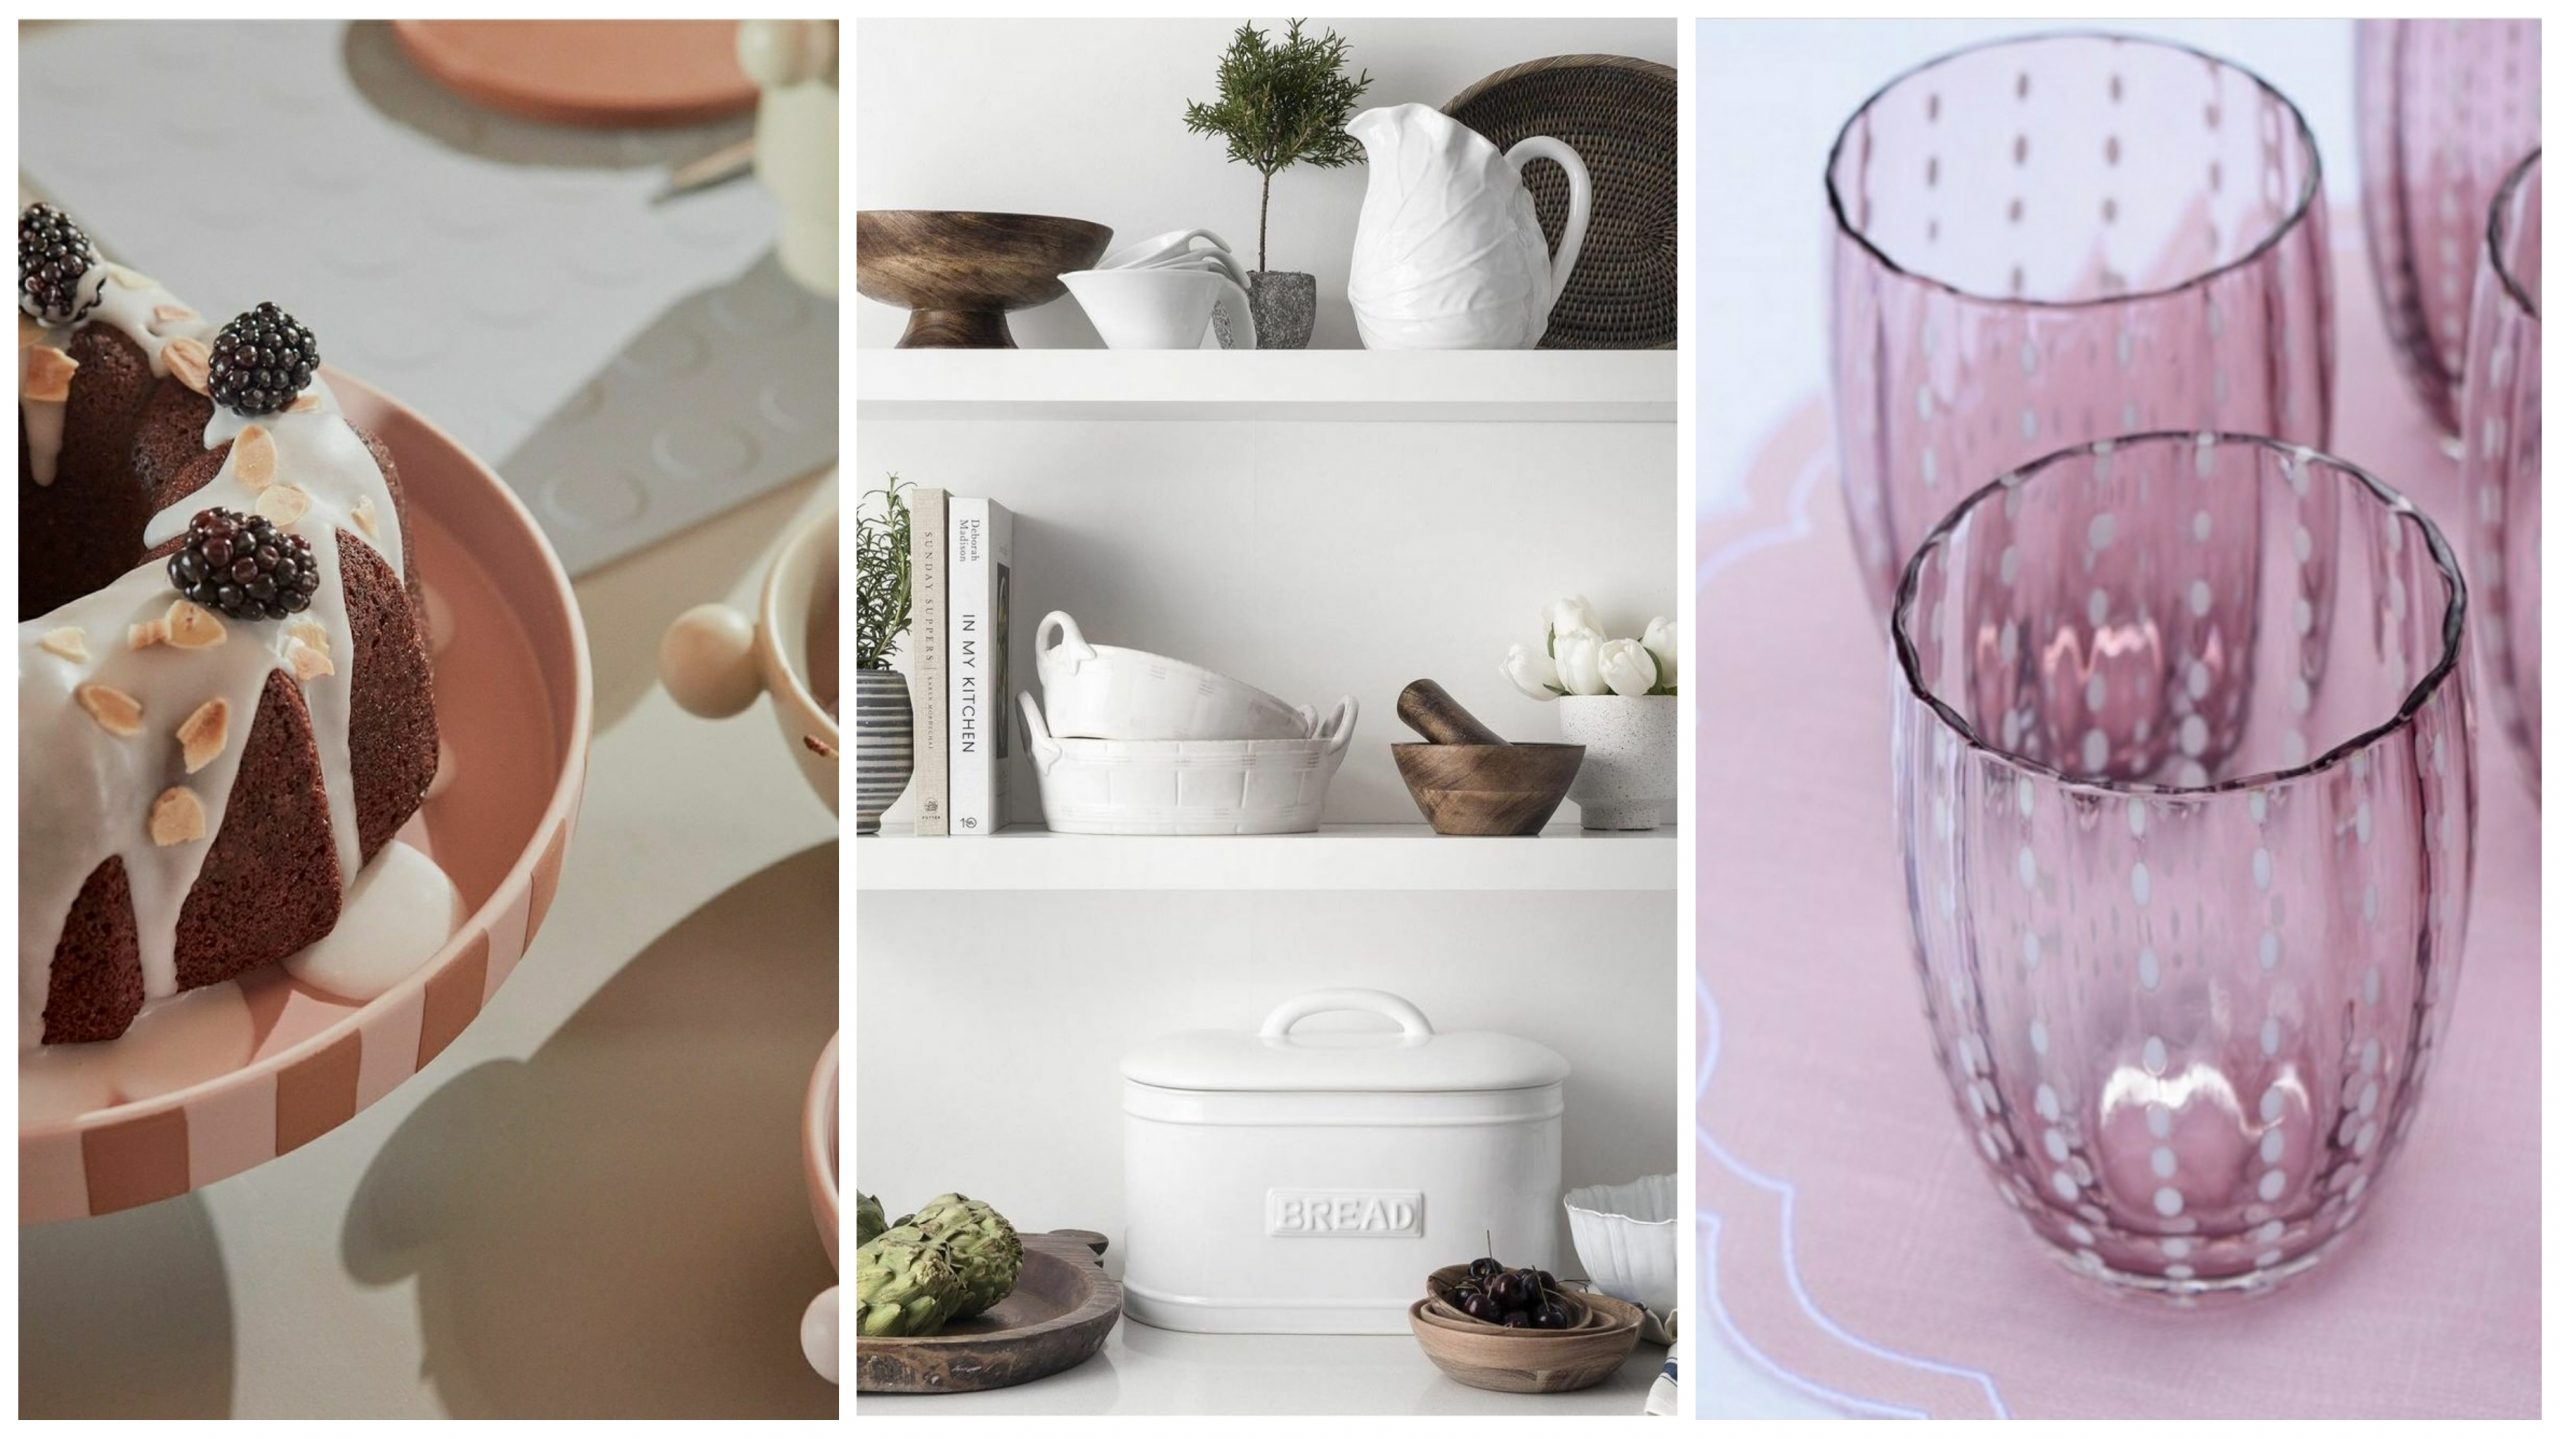 THE HOMEWARE GIFT GUIDE